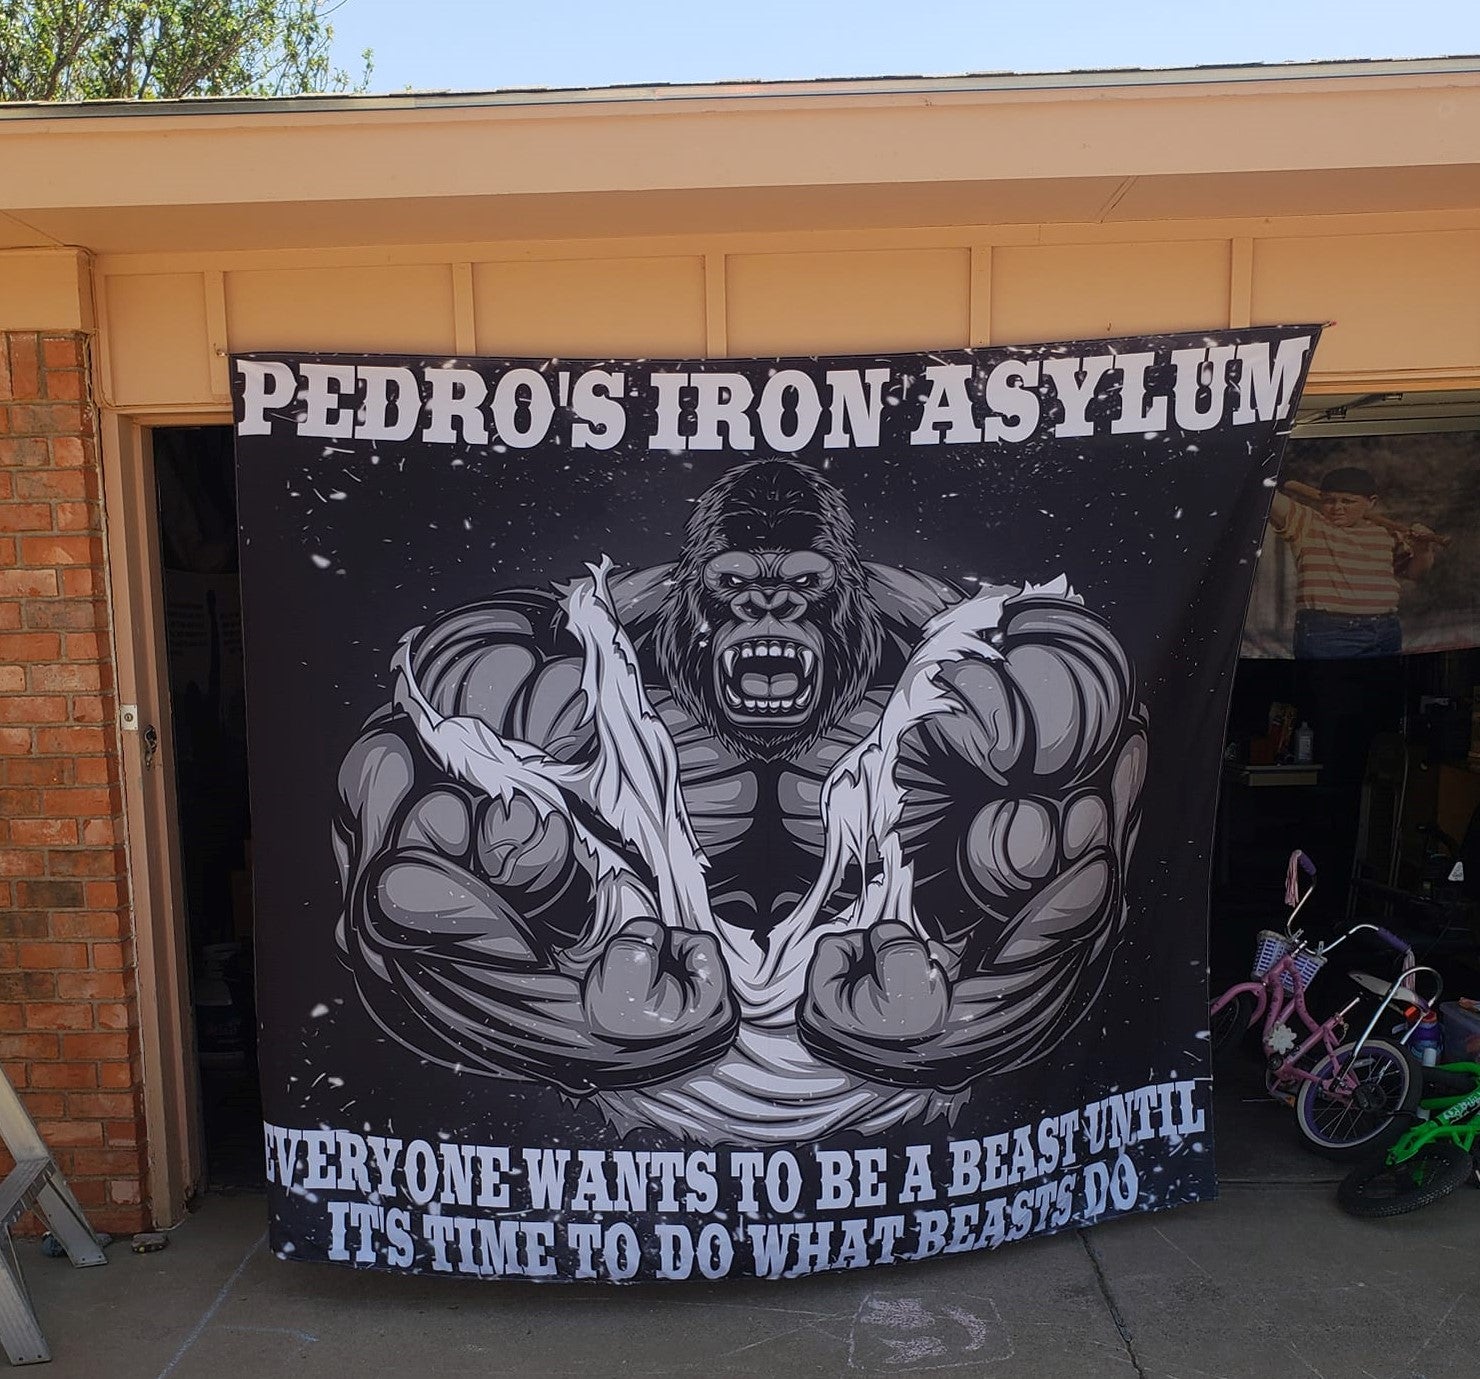 gorilla gym flag and banner with motivational quote